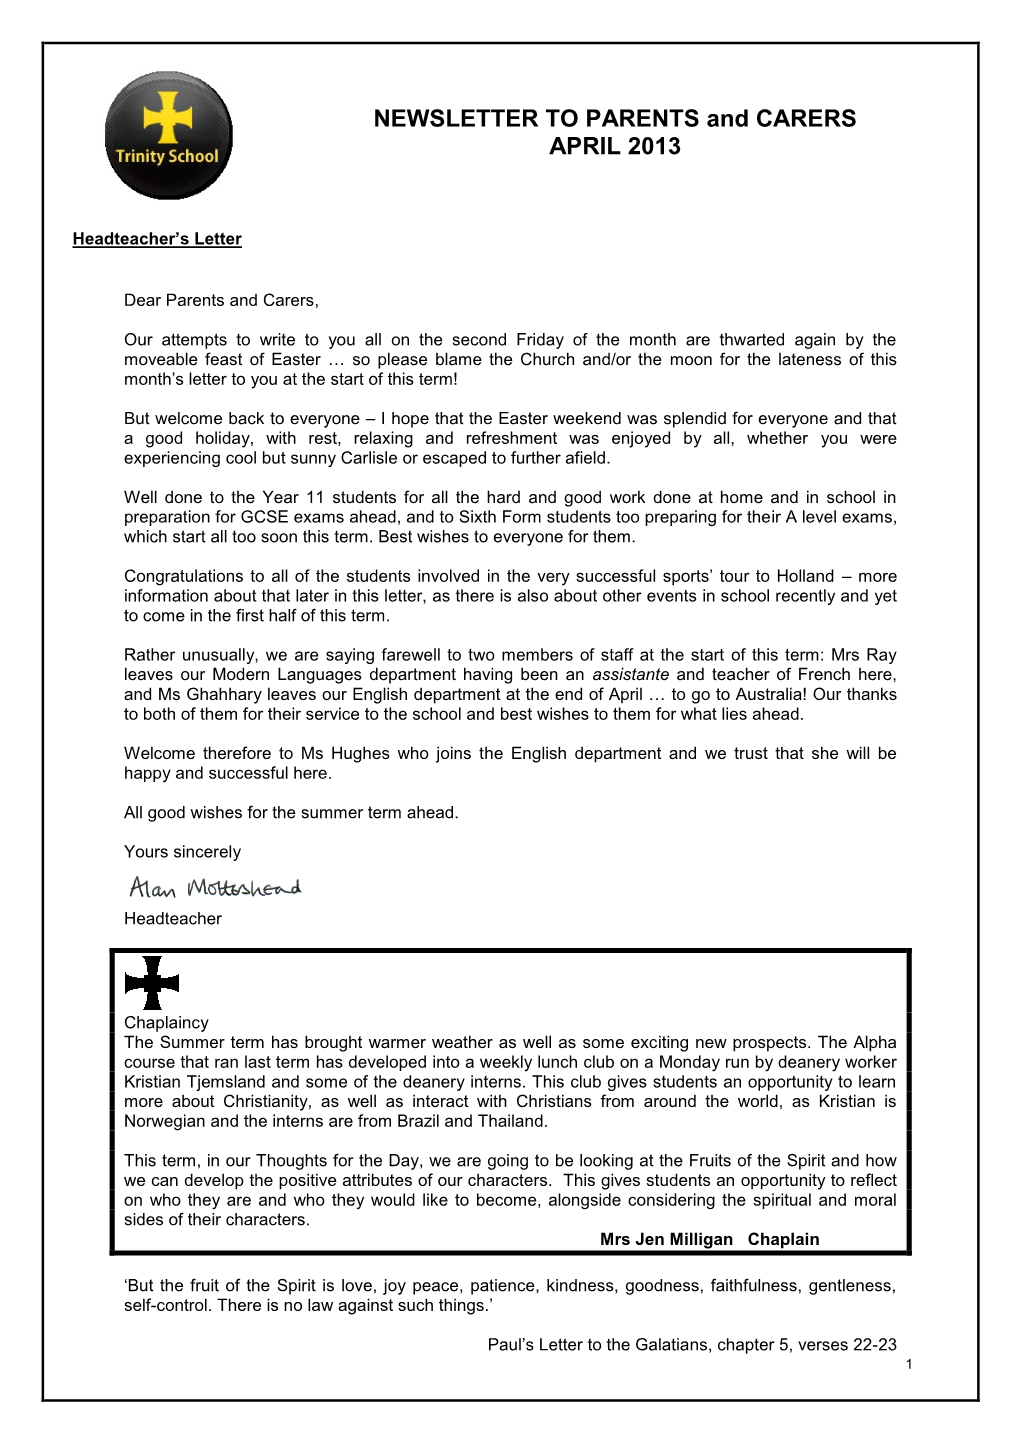 NEWSLETTER to PARENTS and CARERS APRIL 2013